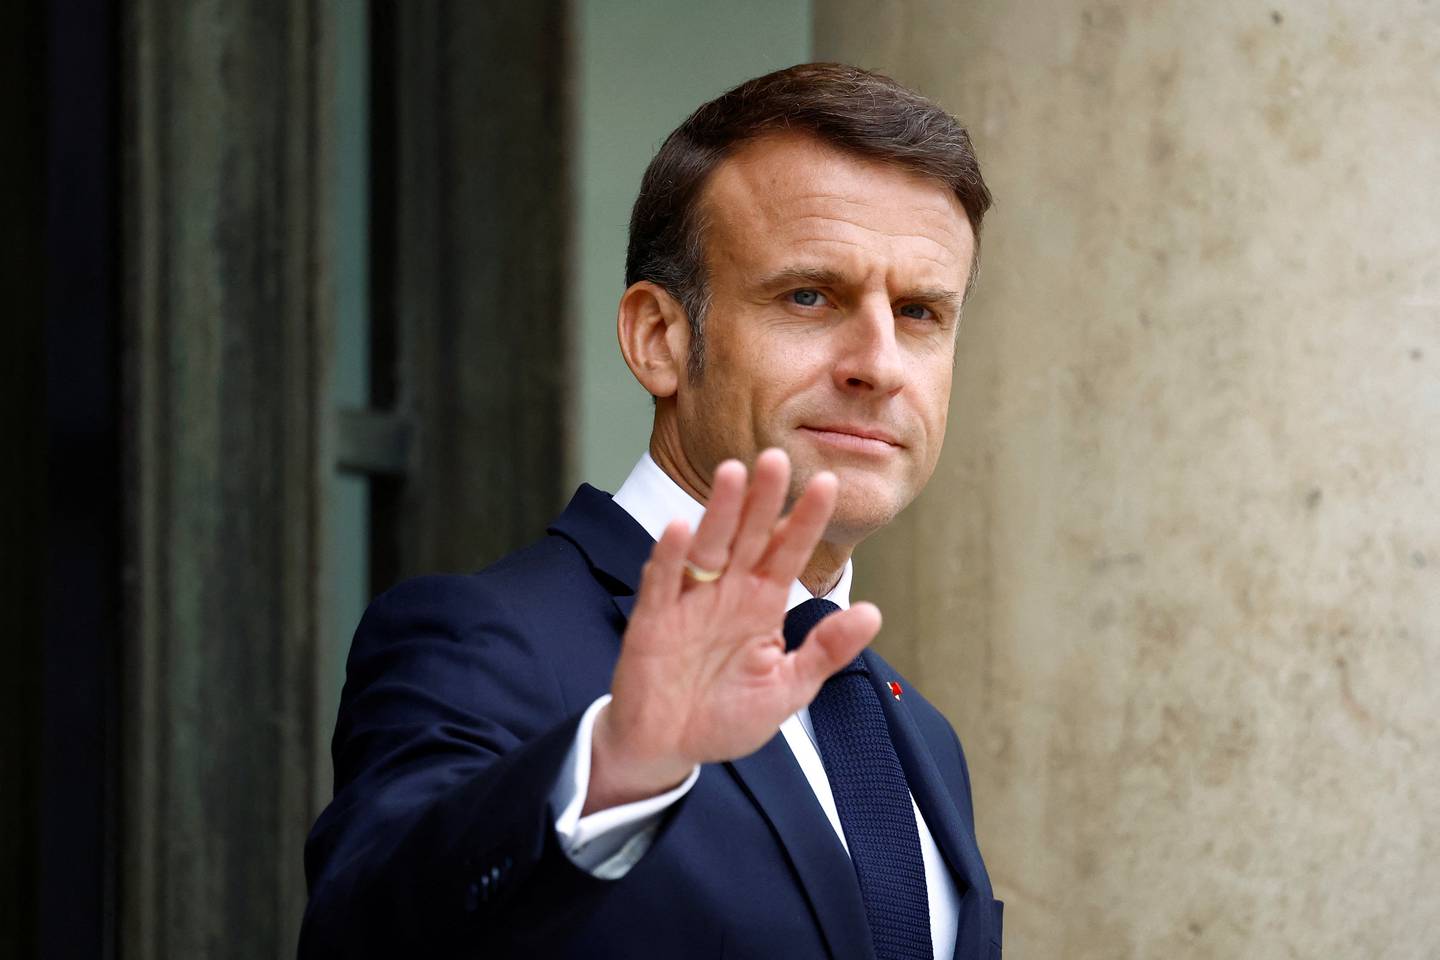 French President Emmanuel Macron waves to journalists before the arrival of Lebanon's caretaker Prime Minister Najib Mikati for a meeting at the Elysee Palace in Paris, France, April 19, 2024. REUTERS/Sarah Meyssonnier